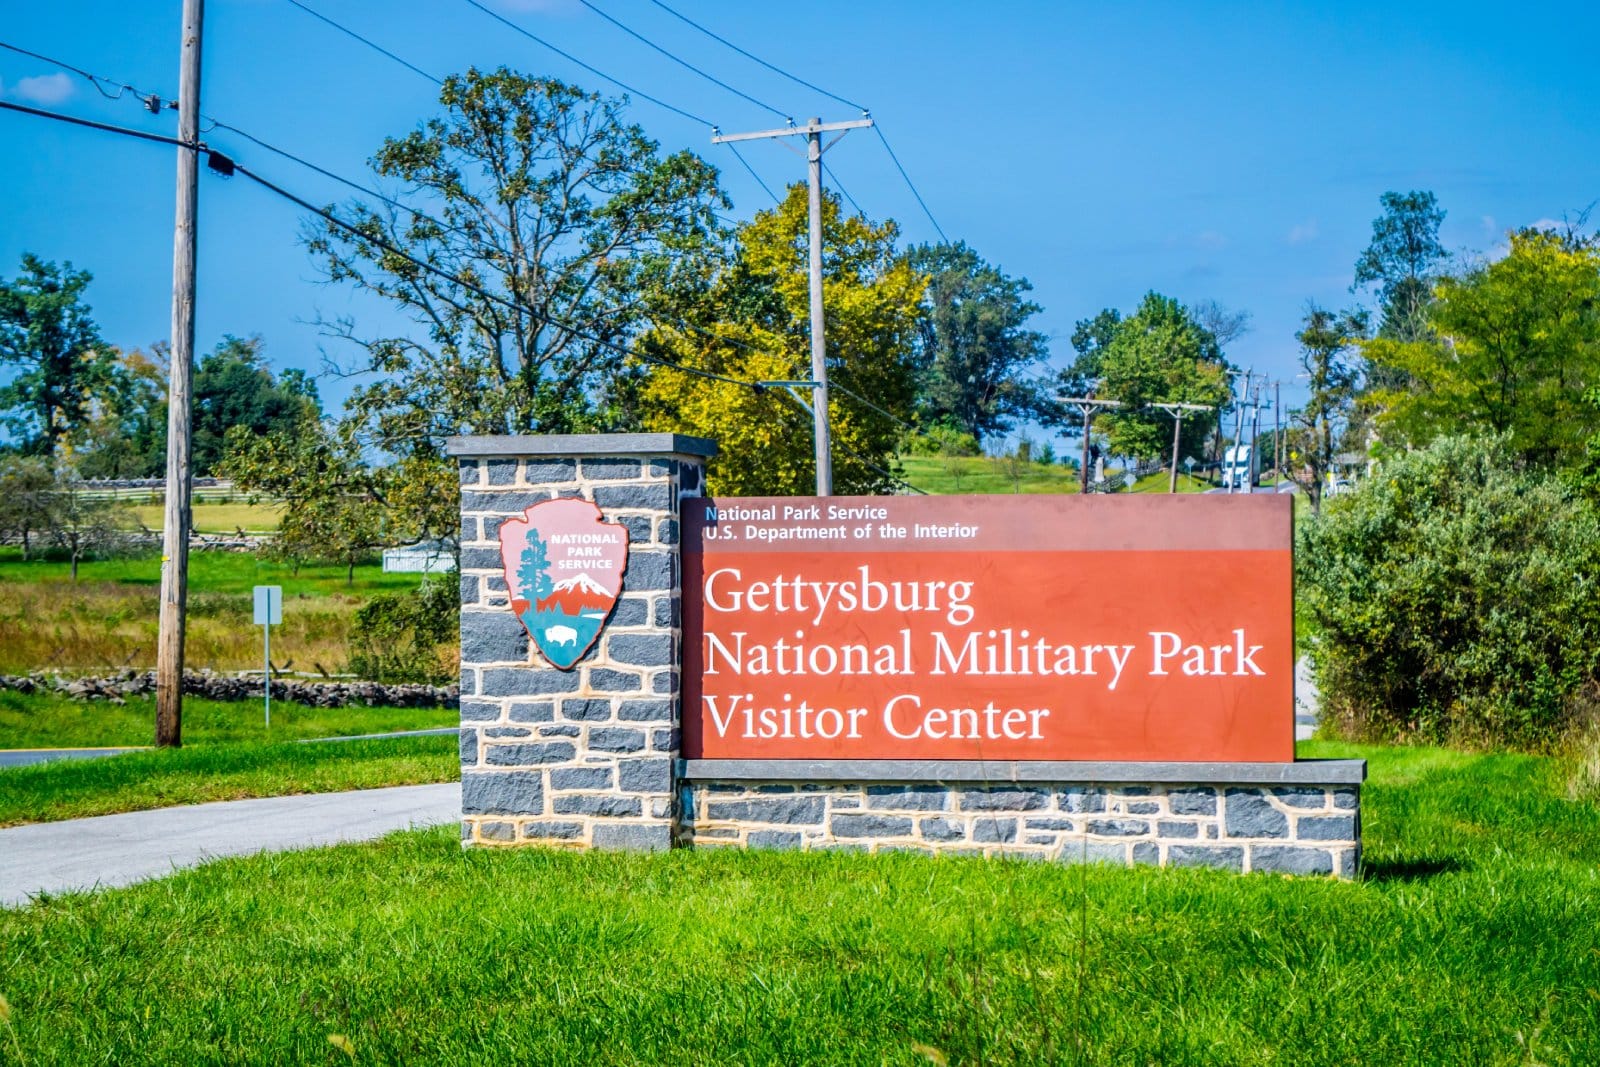 <p>Tourism in Pennsylvania generates around $43 billion, with Gettysburg National Military Park and other historic sites offering free admission but paid tours and experiences available.</p>